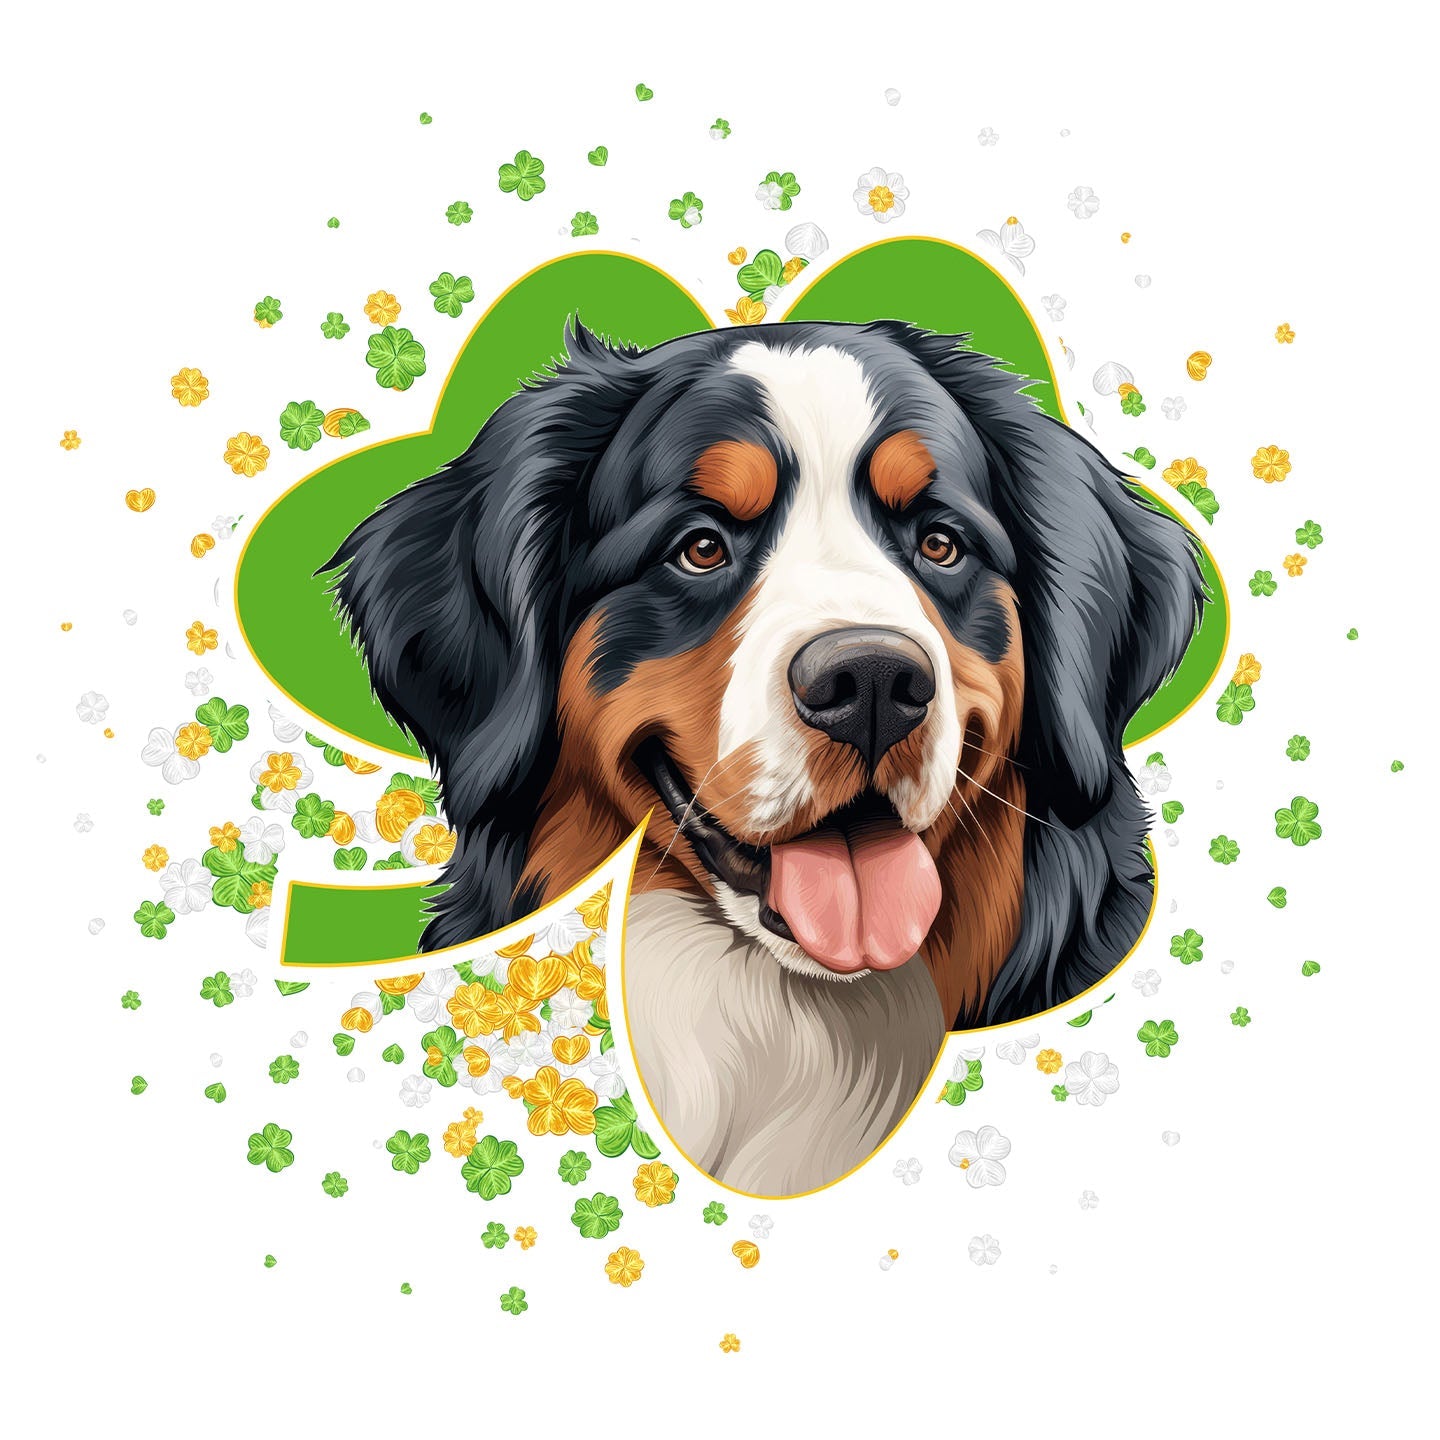 Big Clover St. Patrick's Day Bernese Mountain Dog - Women's Fitted T-Shirt